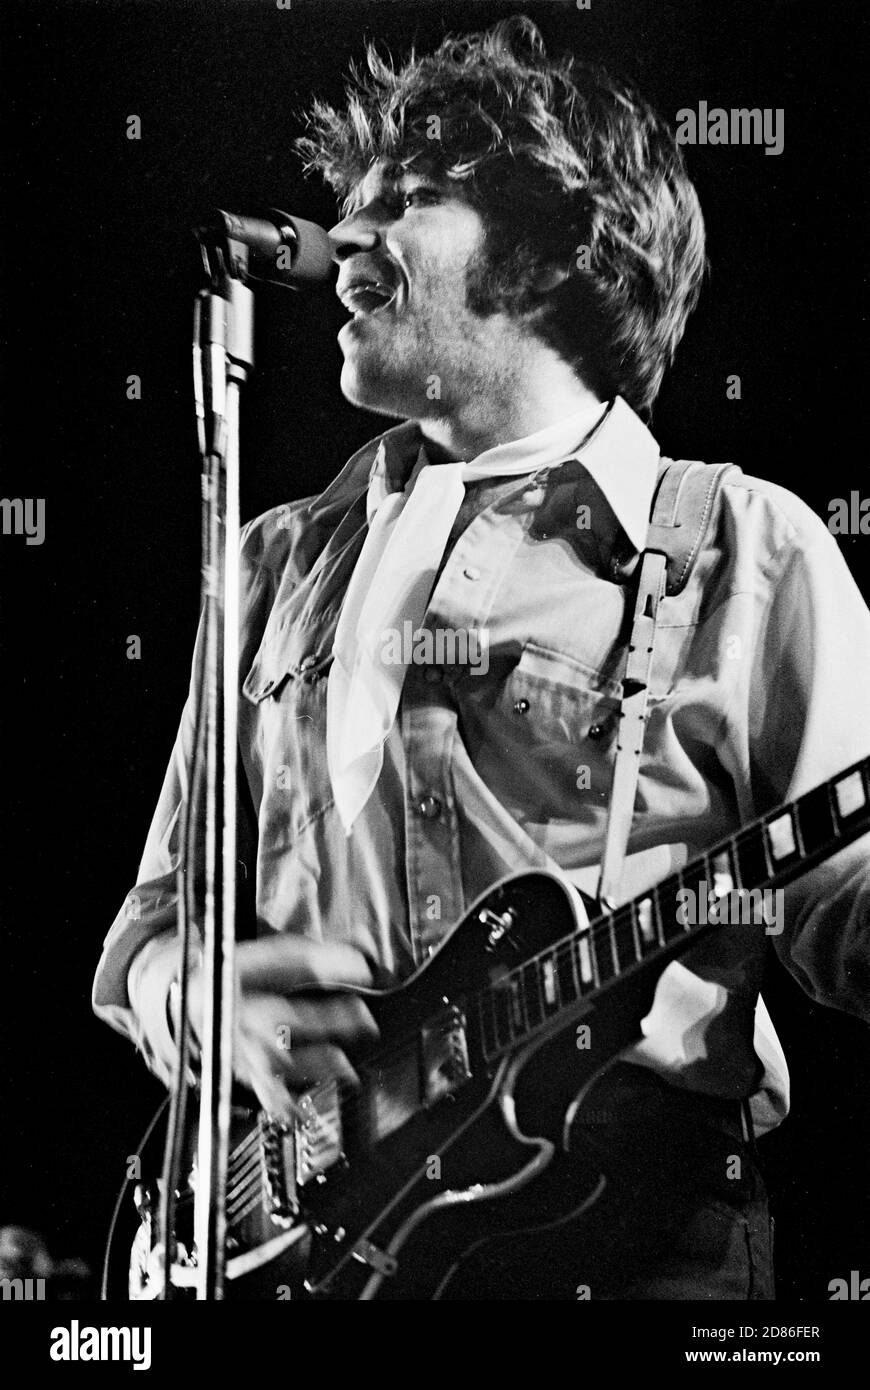 ROTTERDAM, NETHERLANDS: John Fogerty of Creedence Clearwater Revival performs live in Rotterdam, Holland in April 1970. (Photo by Gijsbert Hanekroot) Stock Photo